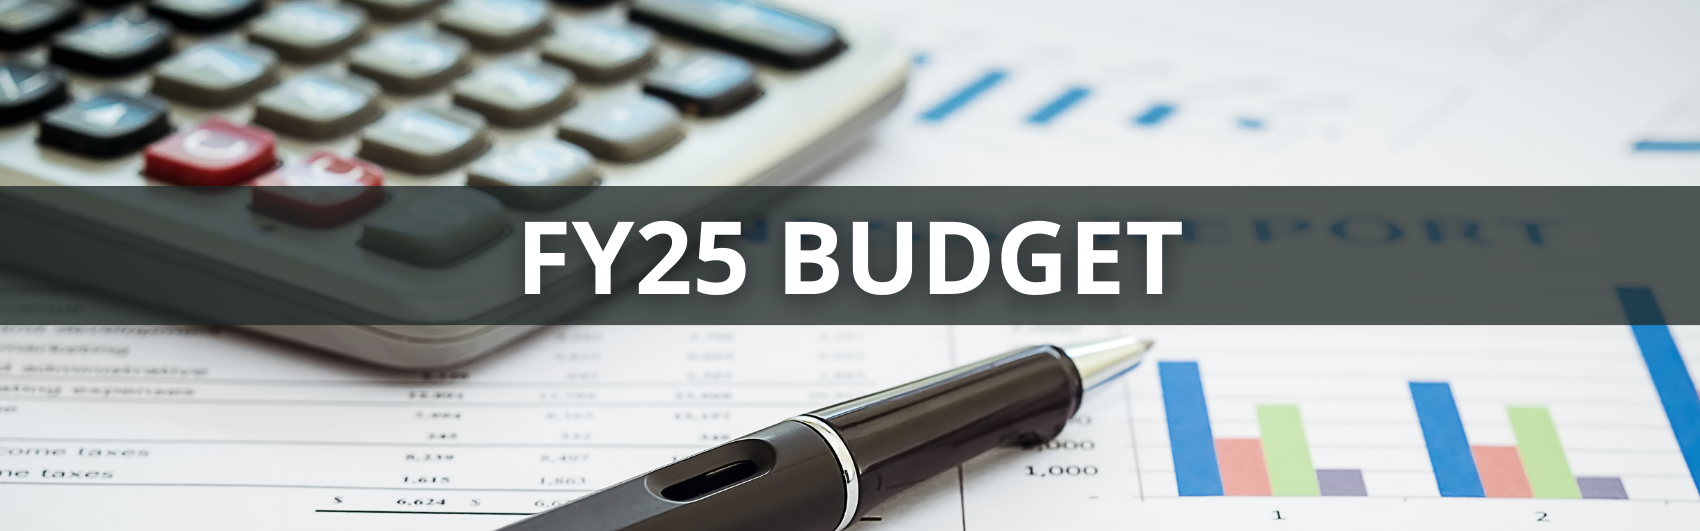 Banner link to the FY25 Budget project page